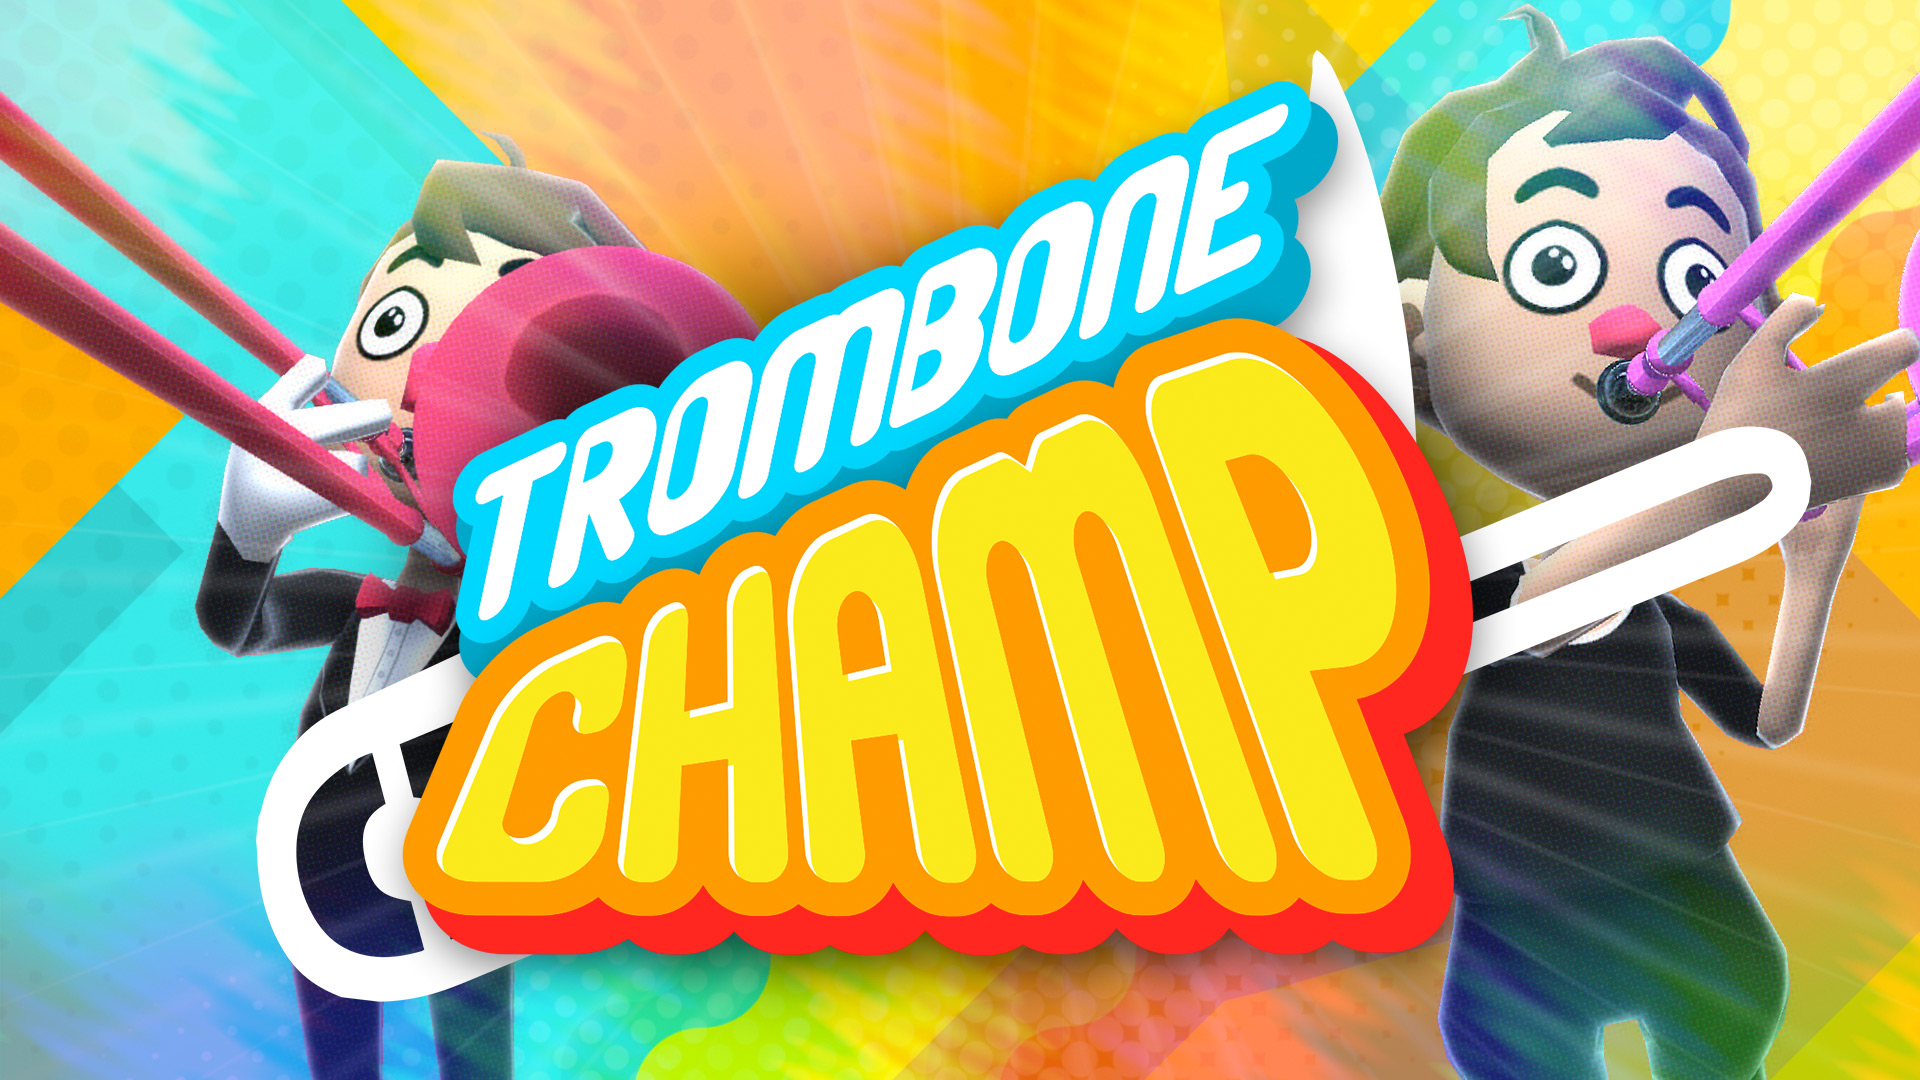 This is a promotional image for Trombone Champ which shows two trombone players playing their instruments behind a bold title “Trombone Champ” rendered in intense rounded font with yellow/red lettering for champ and white/blue lettering for Trombone.